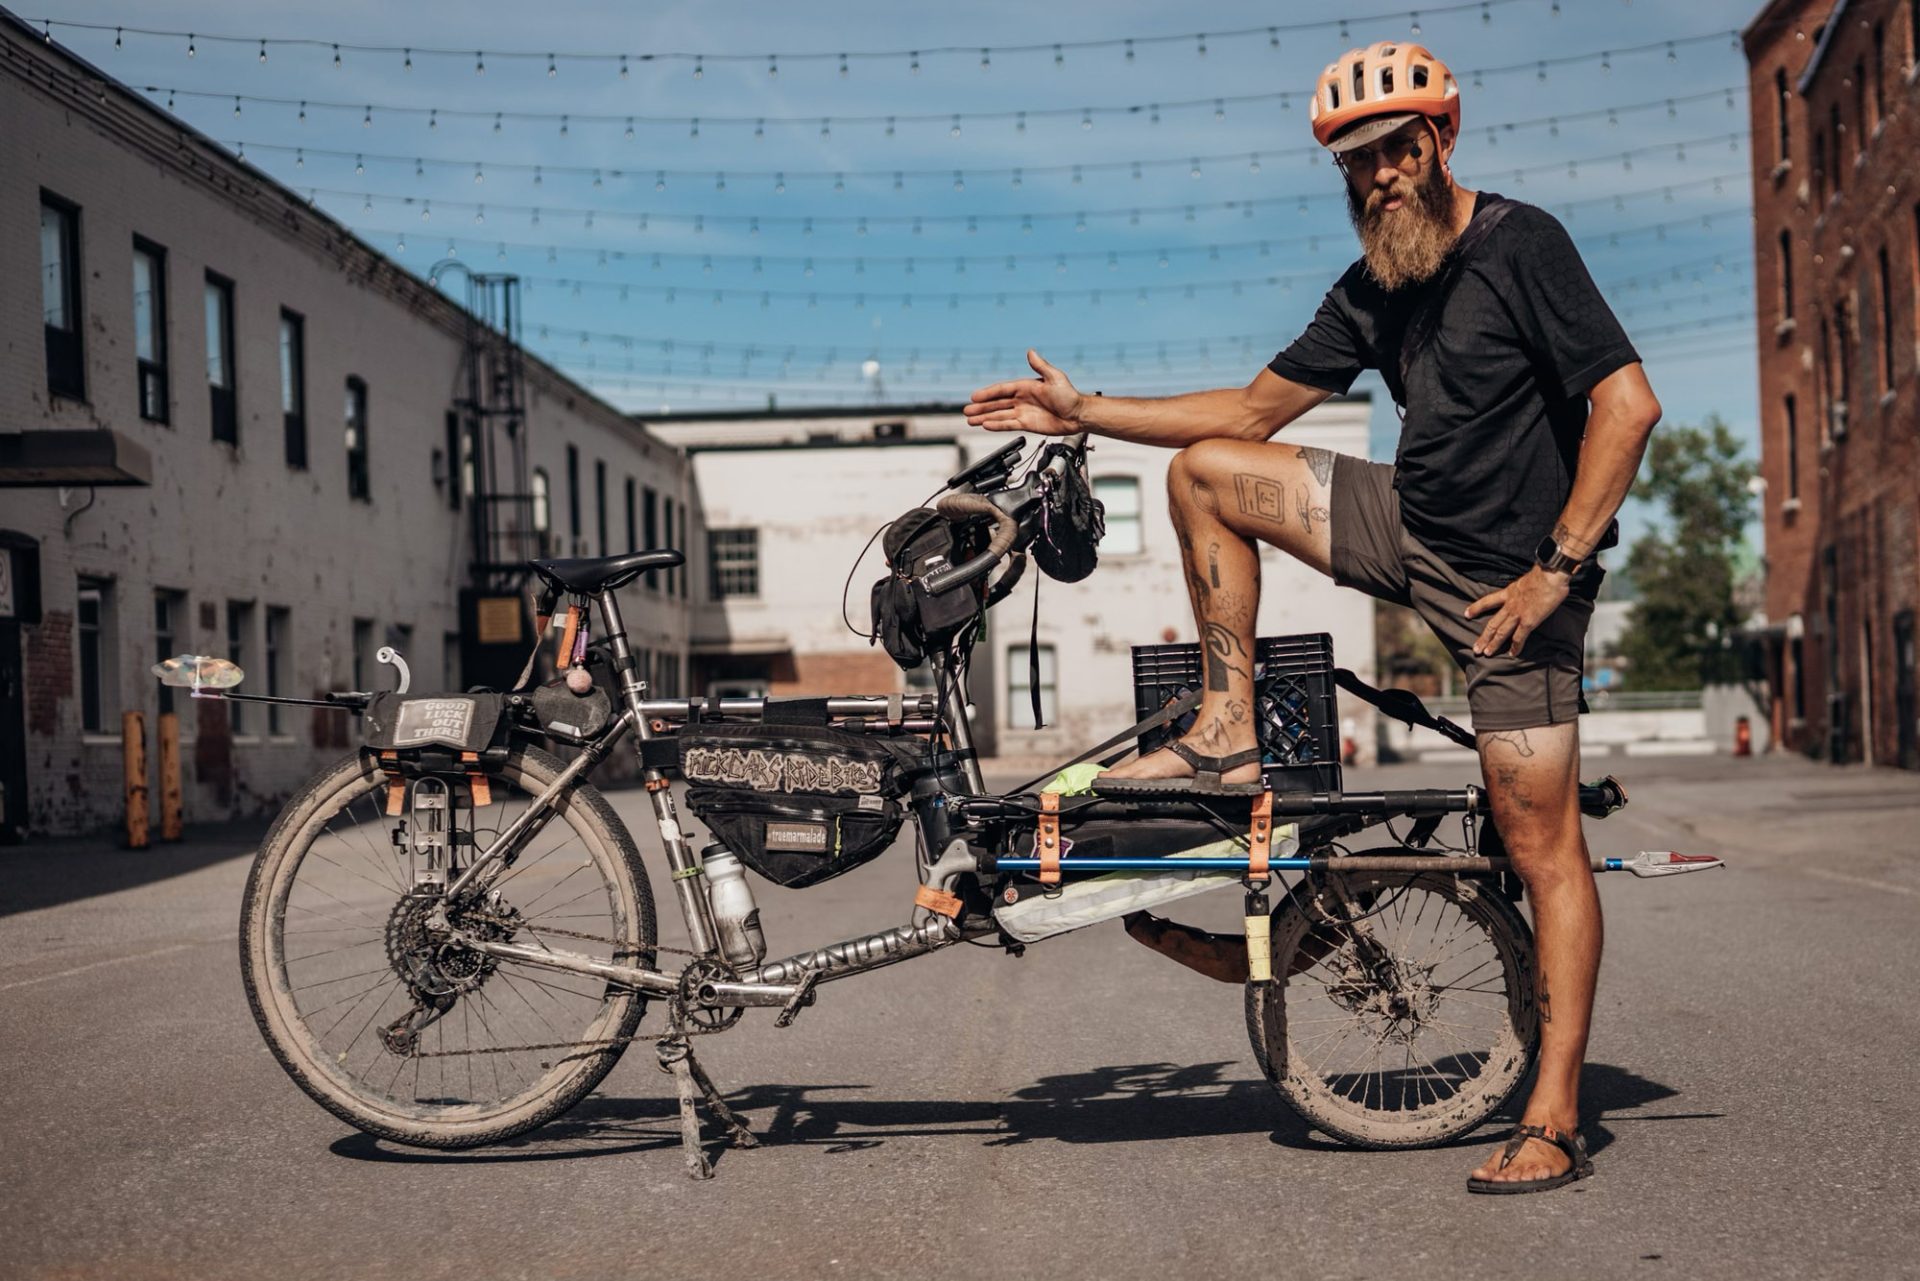 Erik Binggeser stands with his Omnium cargo bike. he's wearing a t-shirt and shorts with sandals and has a long beard.